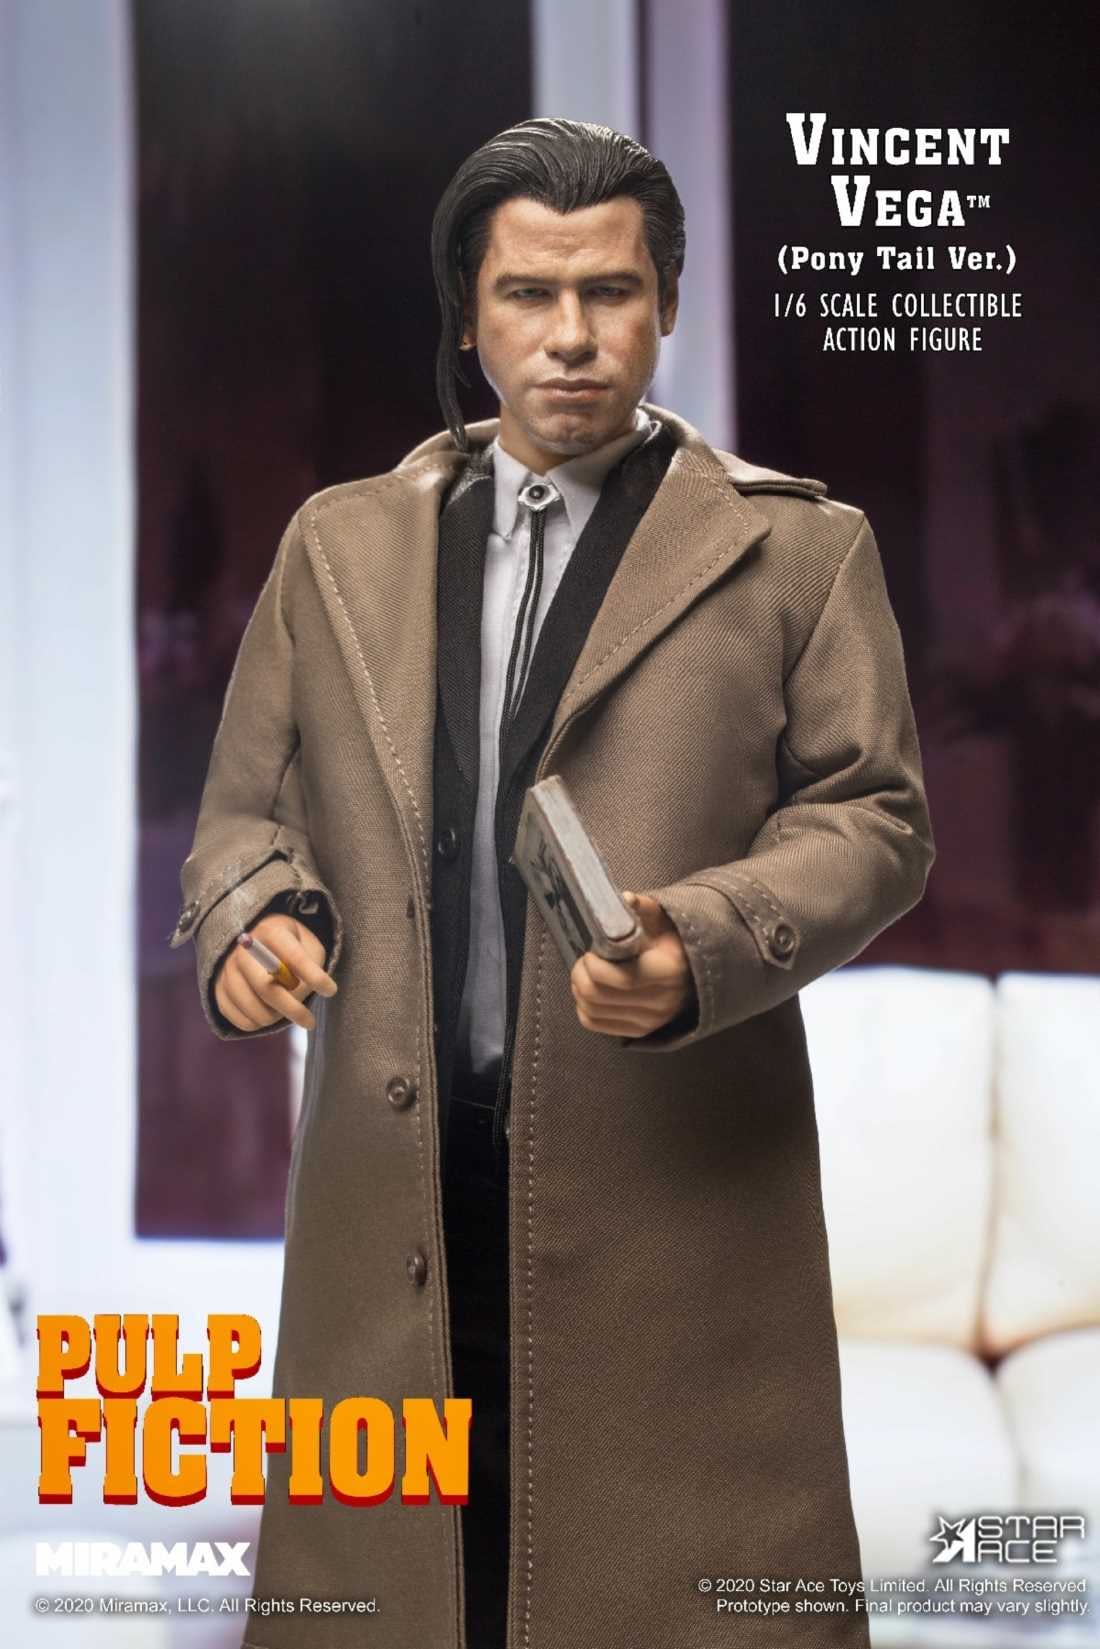 "Pulp Fiction" Come to Life with Vincent Vega Figure from Star Ace